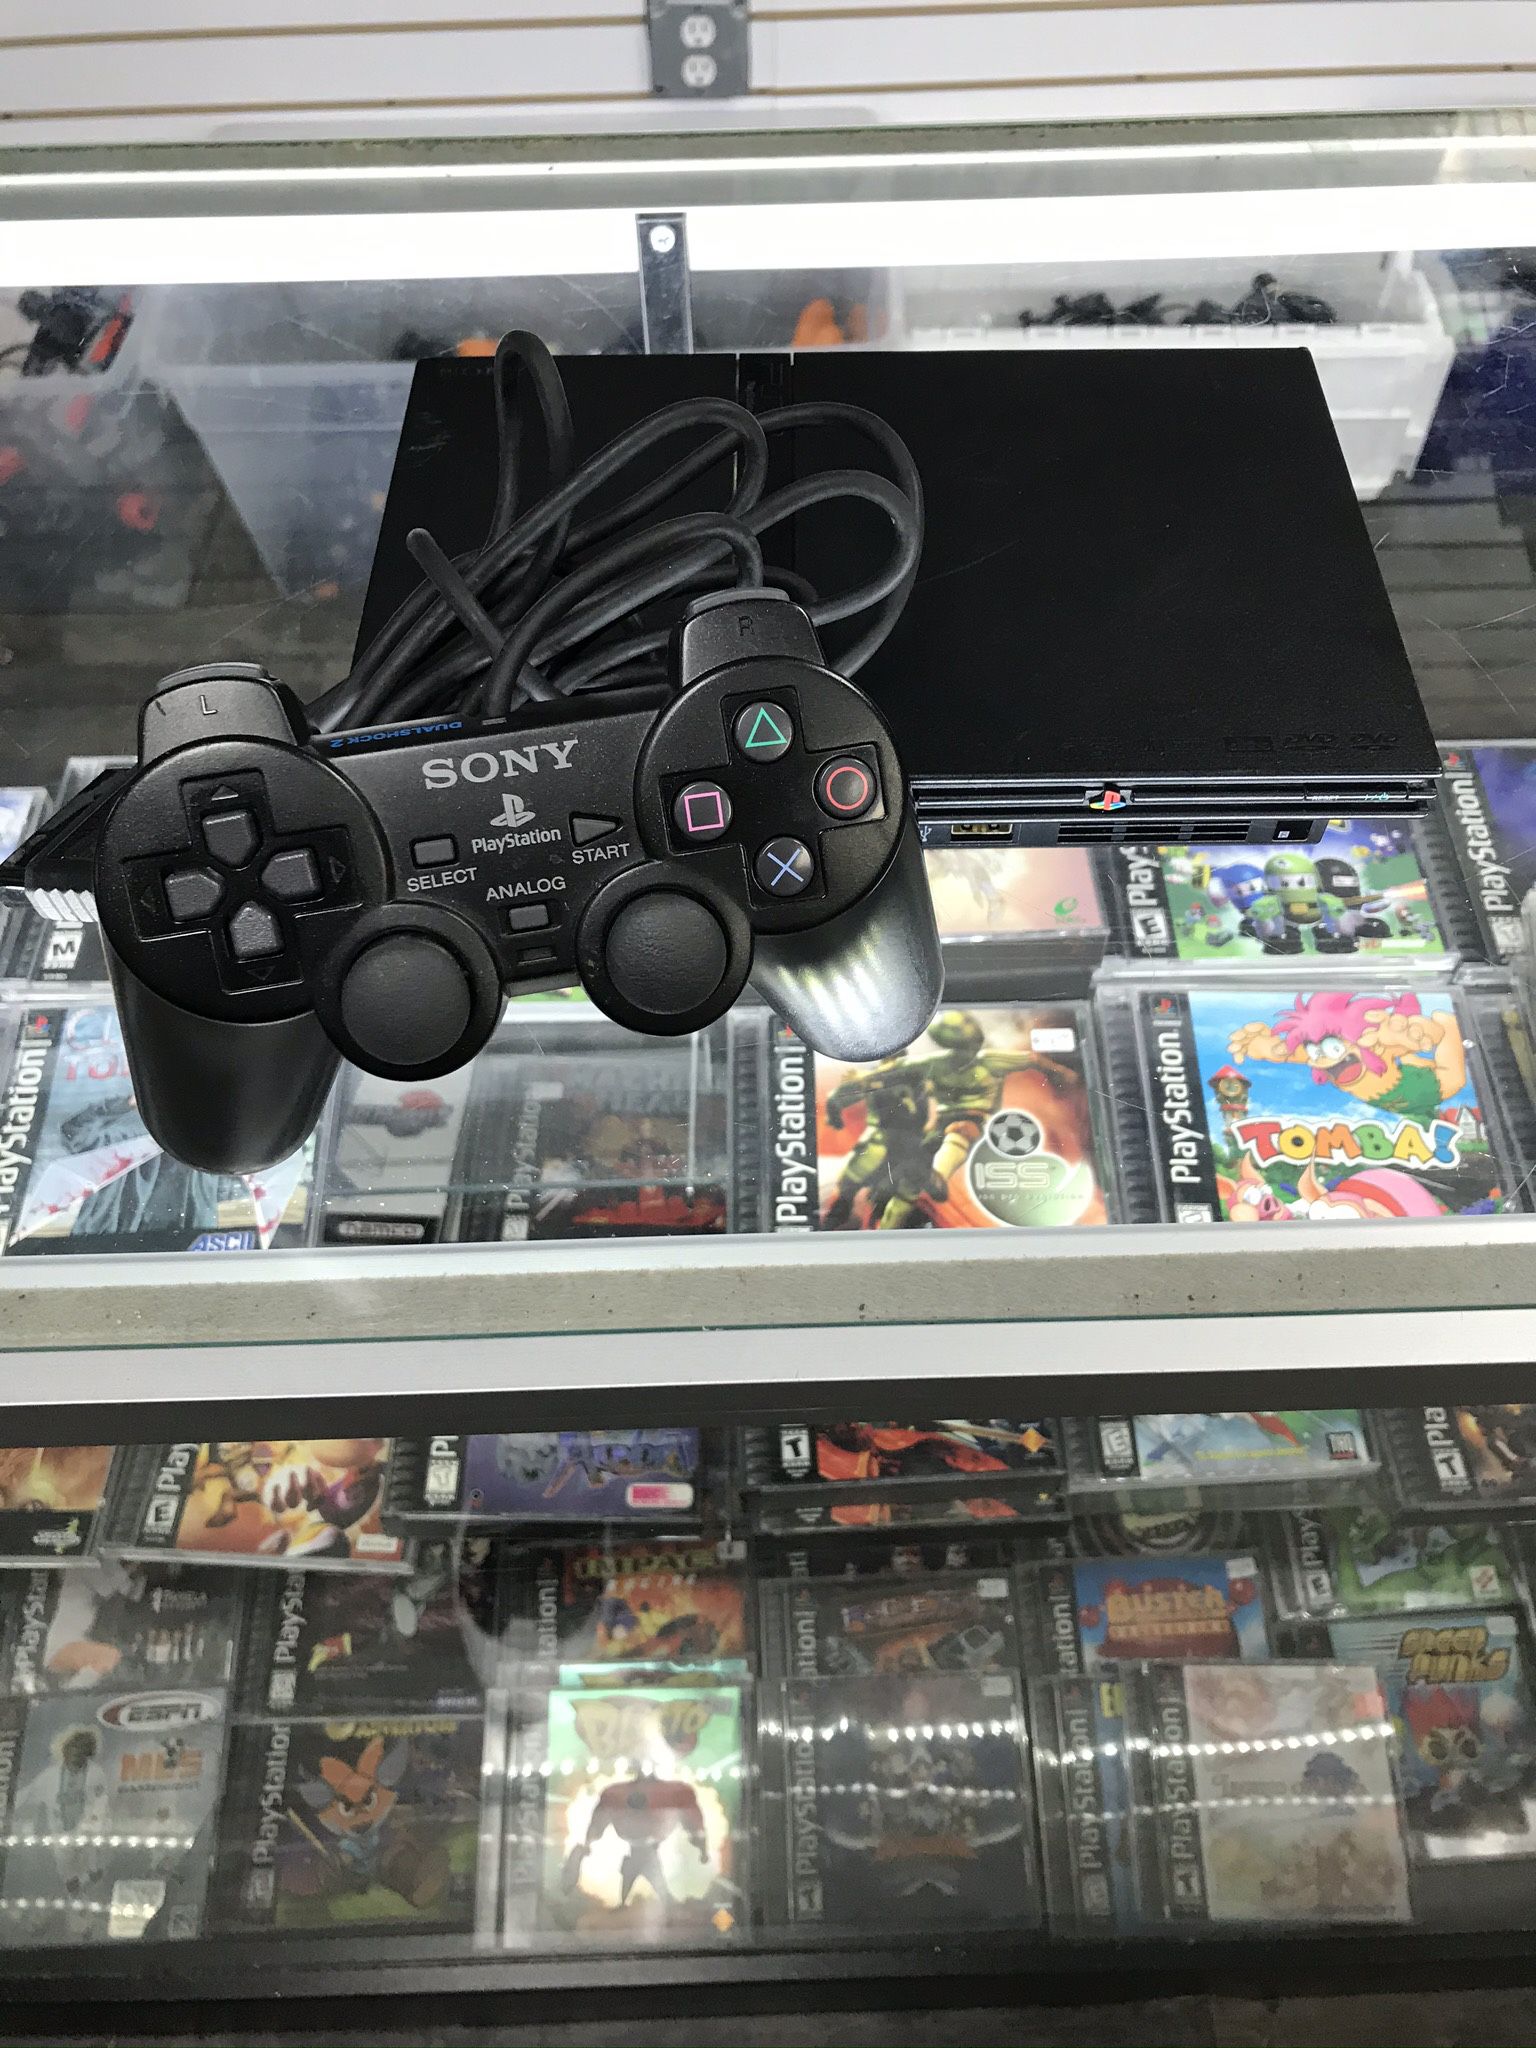 PlayStation 2 Slim With Wireless Controller $130 Gamehogs 11am-7pm